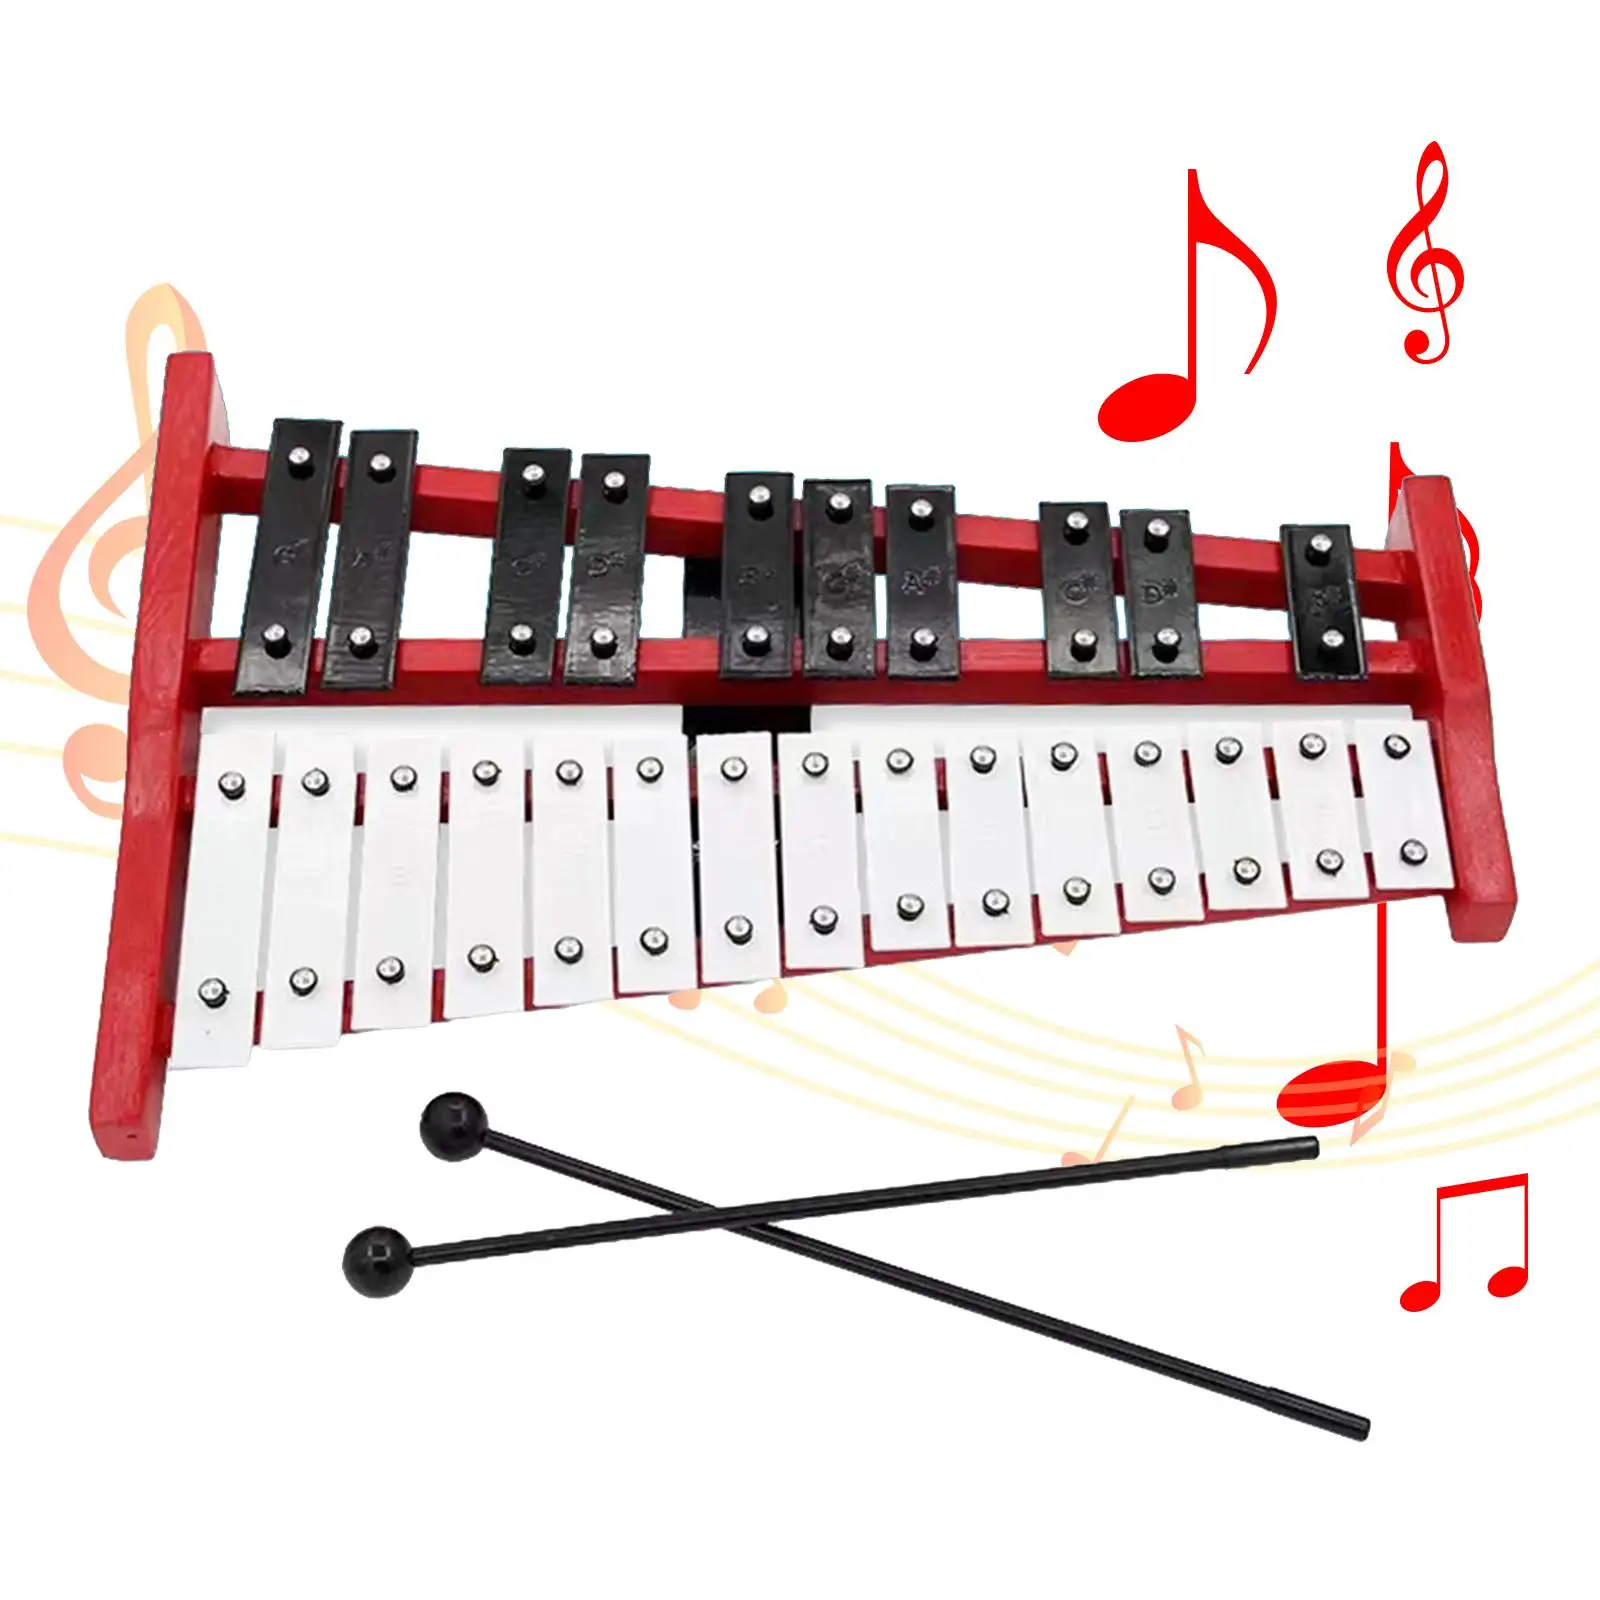 Xylophone for Kids Portable Aluminum Wooden Hand Knock Piano Toy for Live Performance Music Lessons School Orchestras Event Home